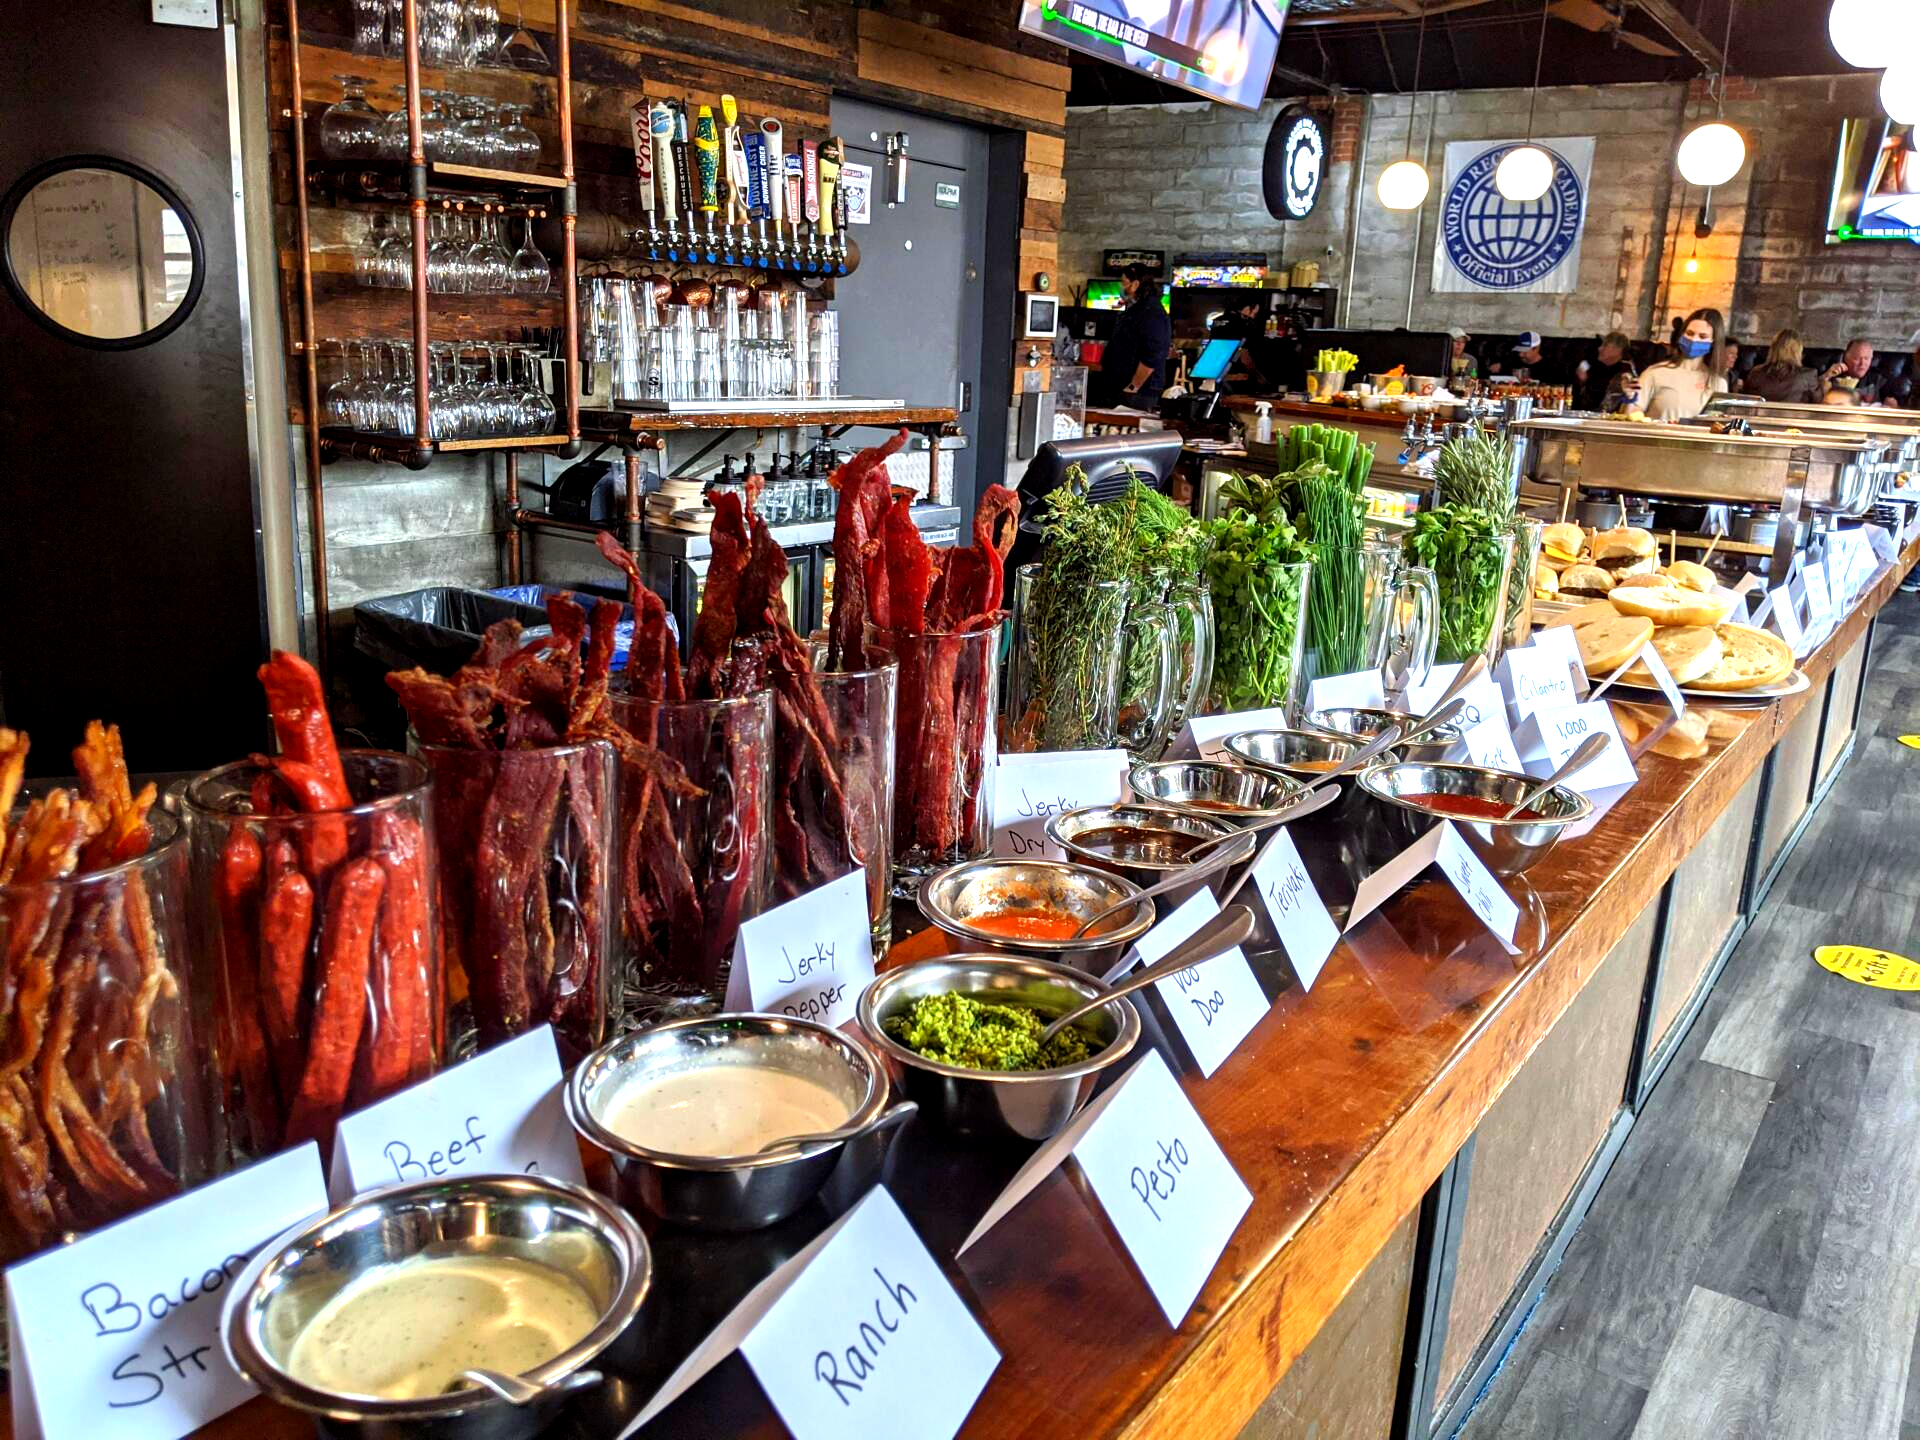 Largest 'build-your-own' Bloody Mary Bar: world record set by The Garage Bar & Bowl